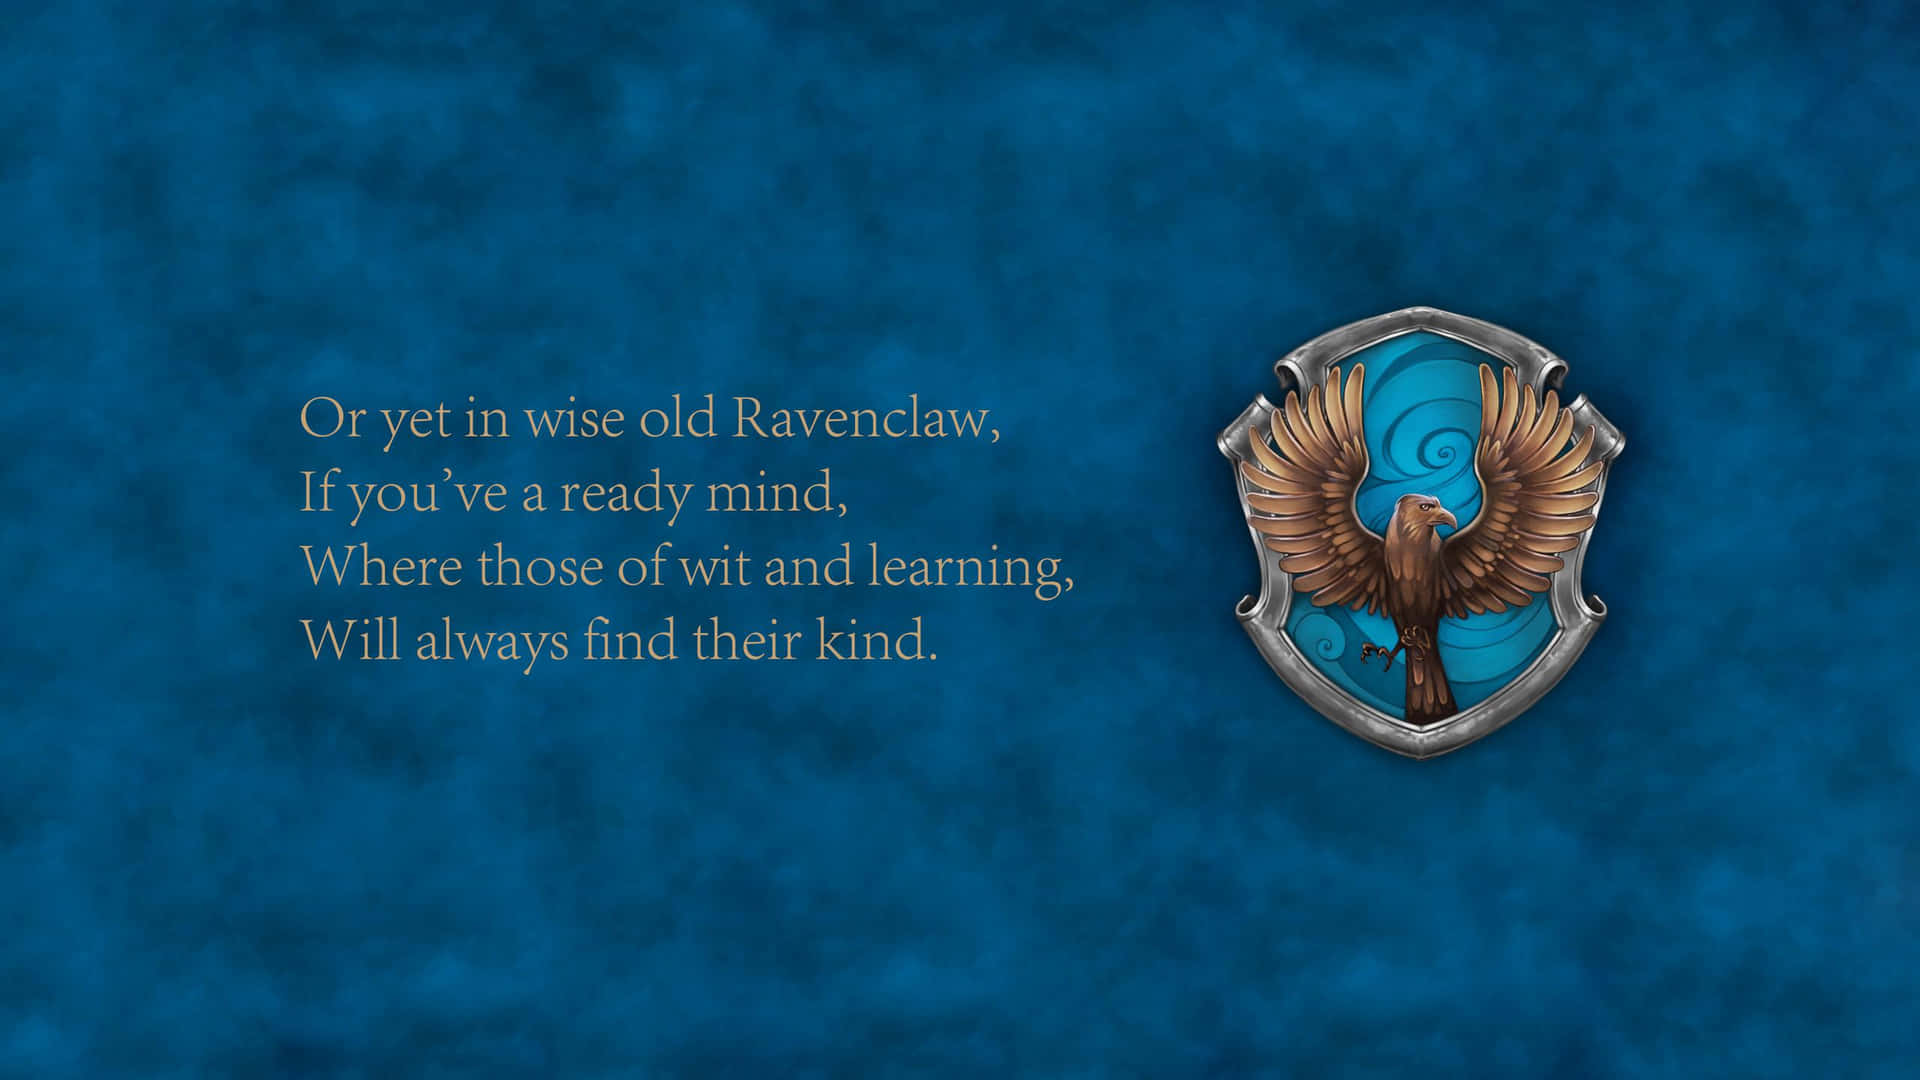 The illustrious Ravenclaw house of Hogwarts Wallpaper